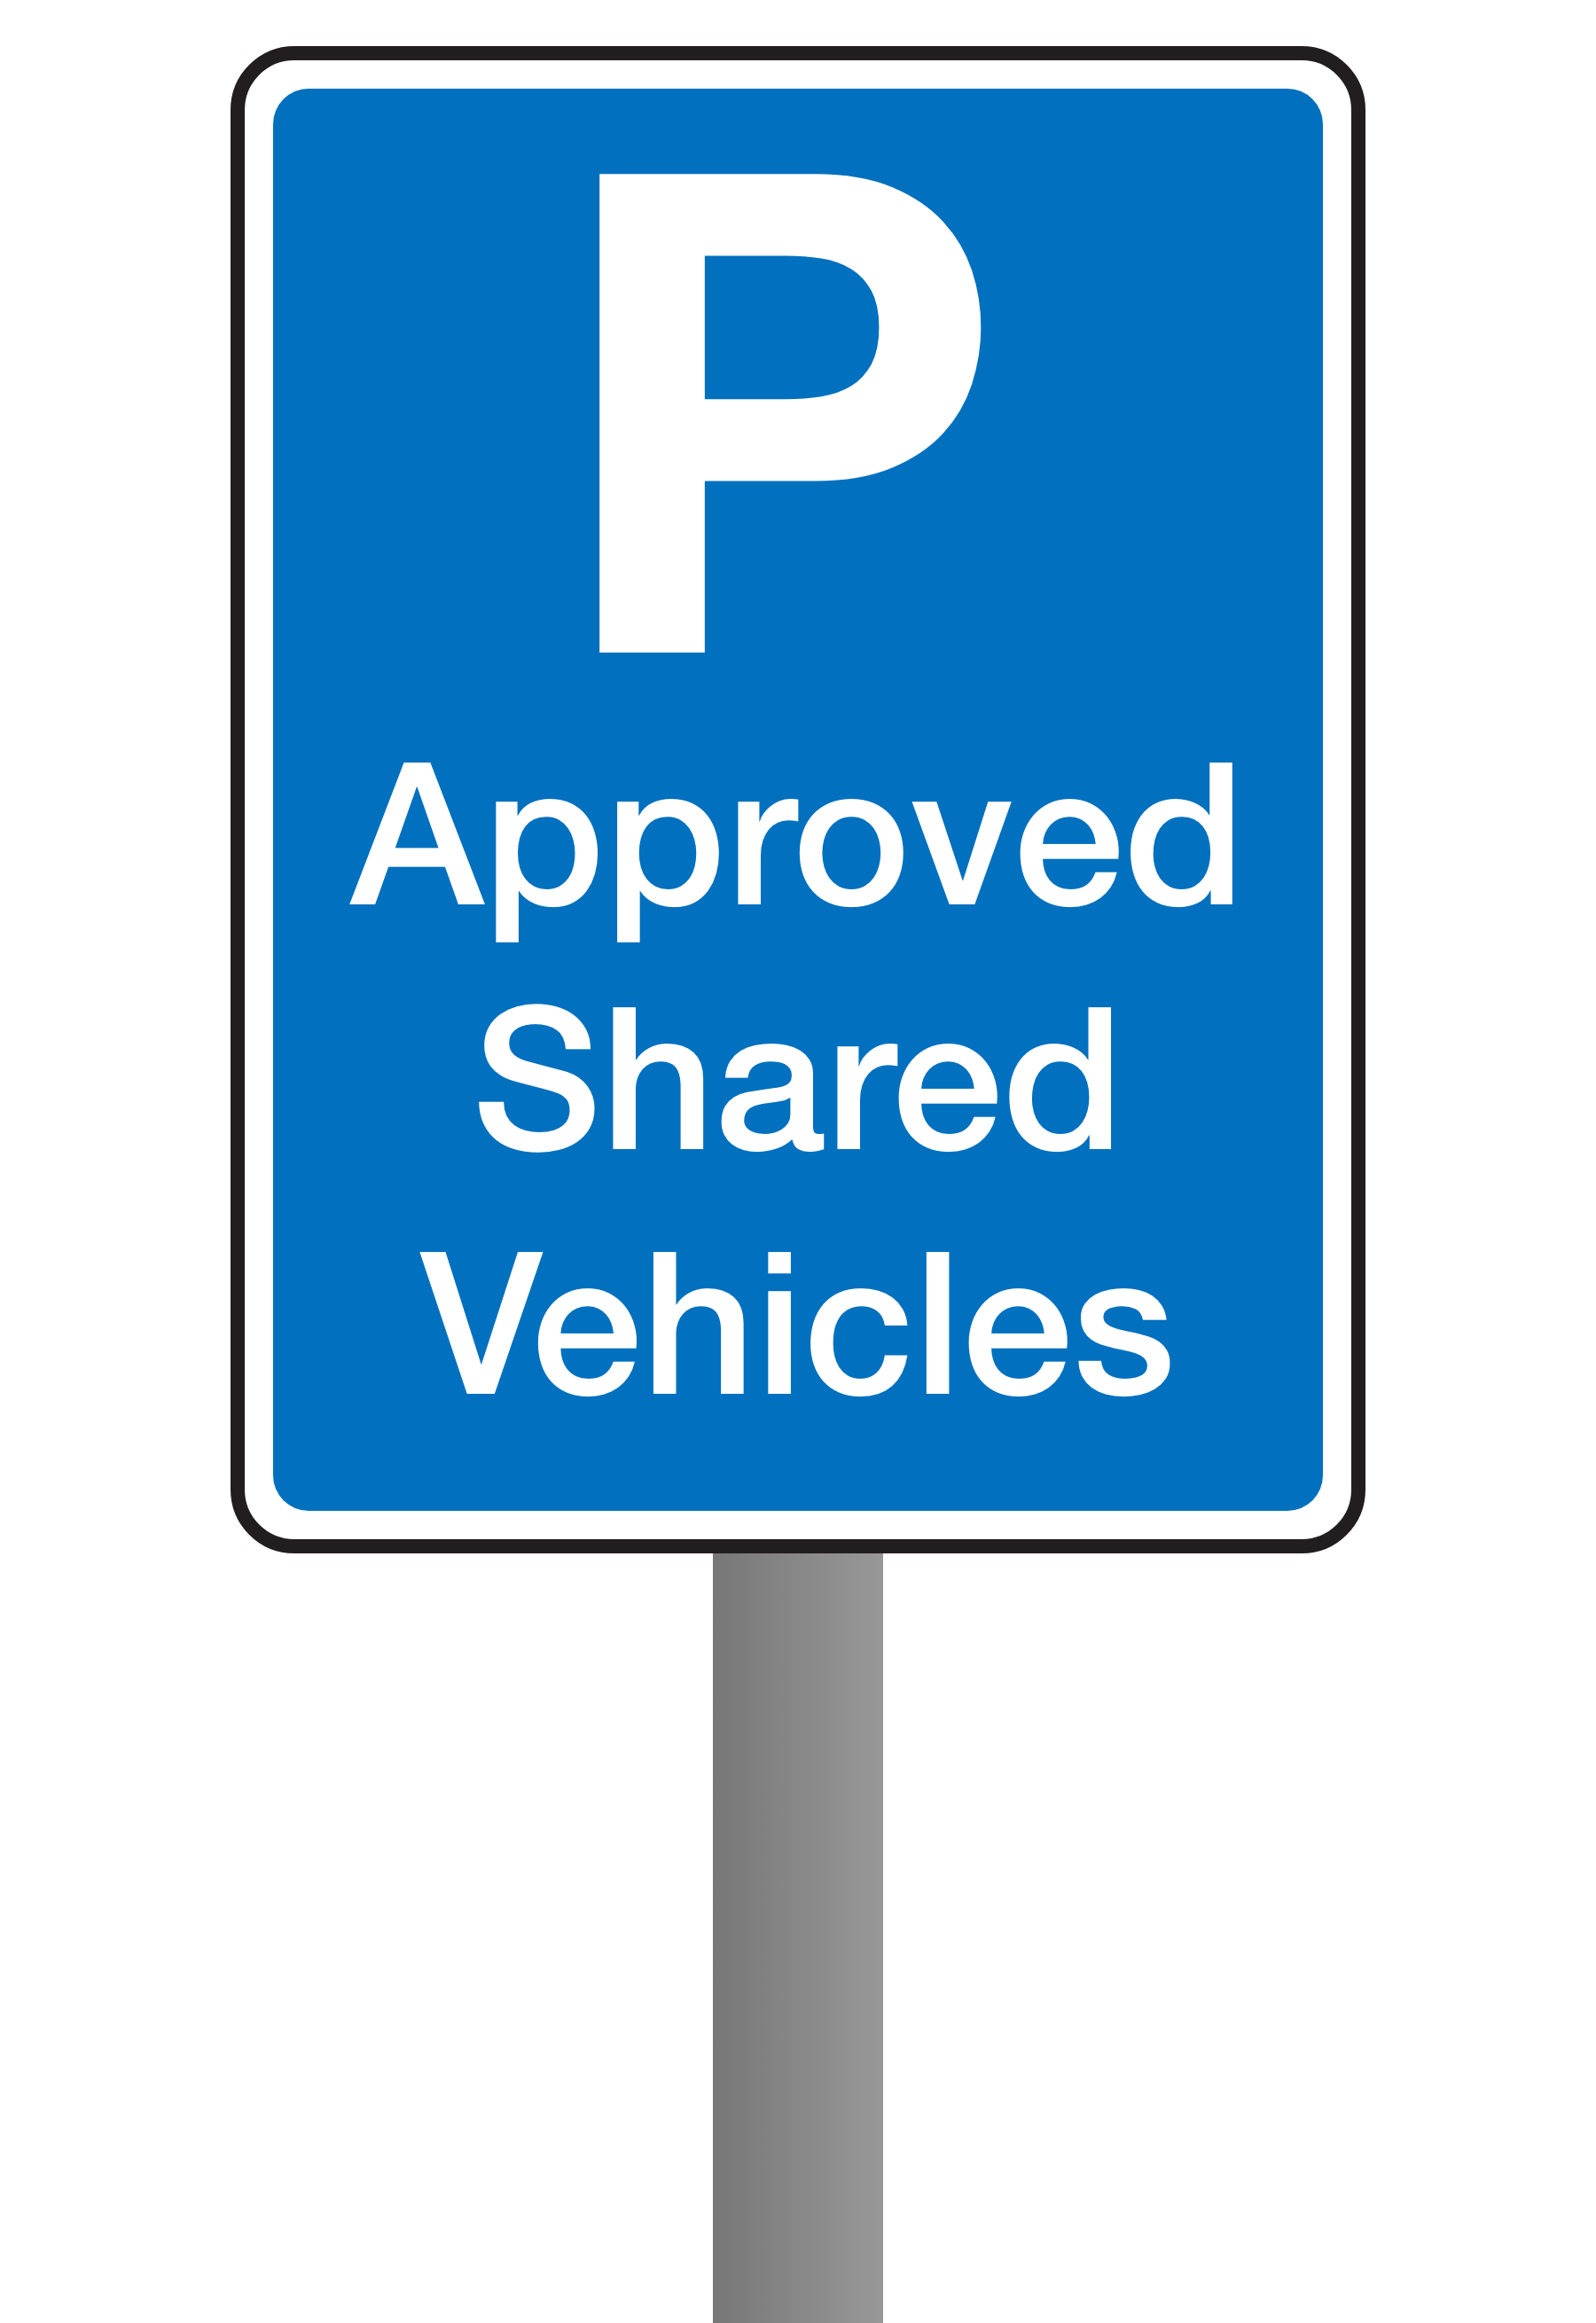 Approved shared vehicles Parking Sign-wide